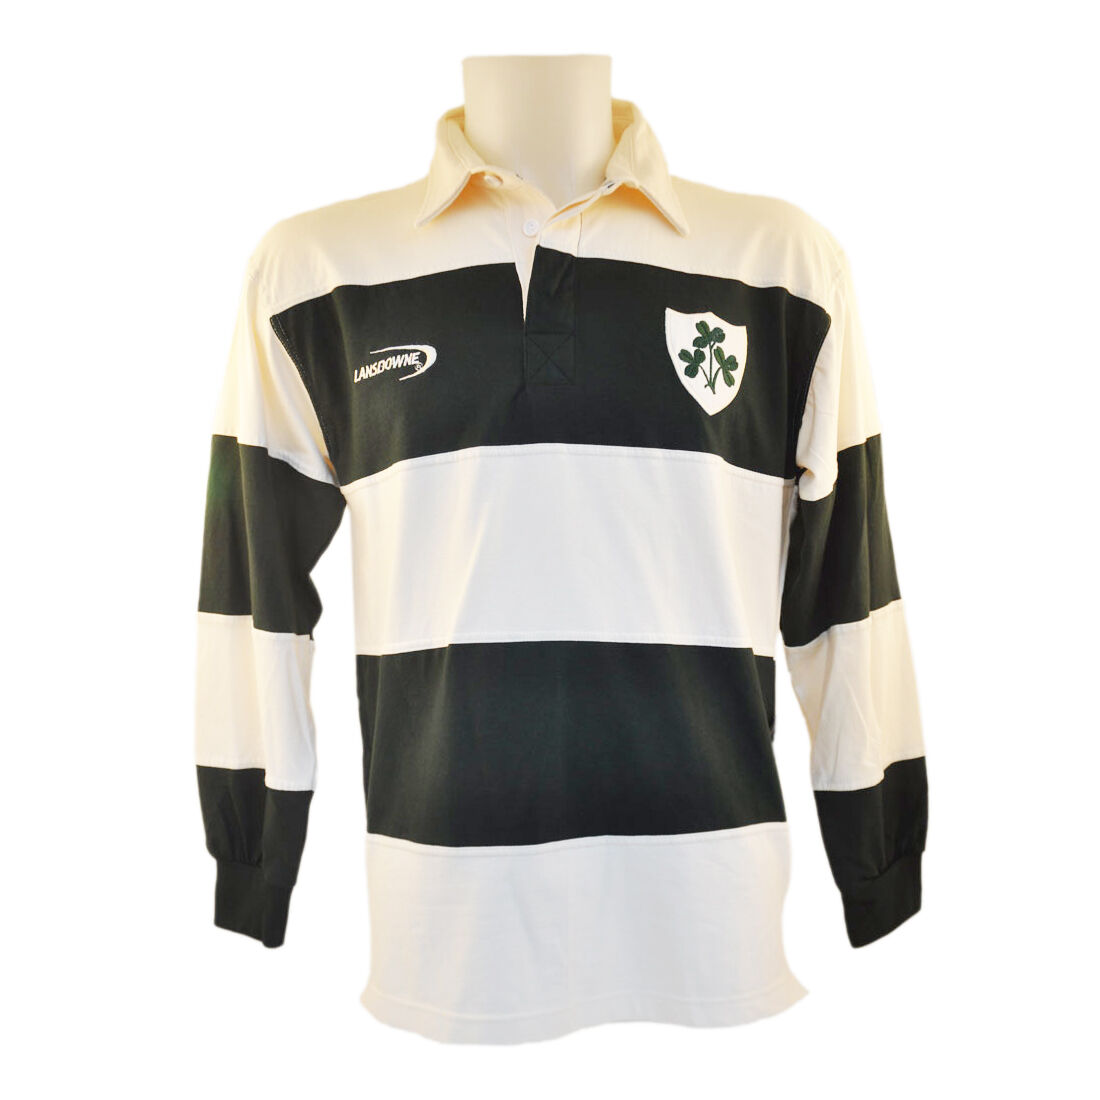 irish rugby baby clothes